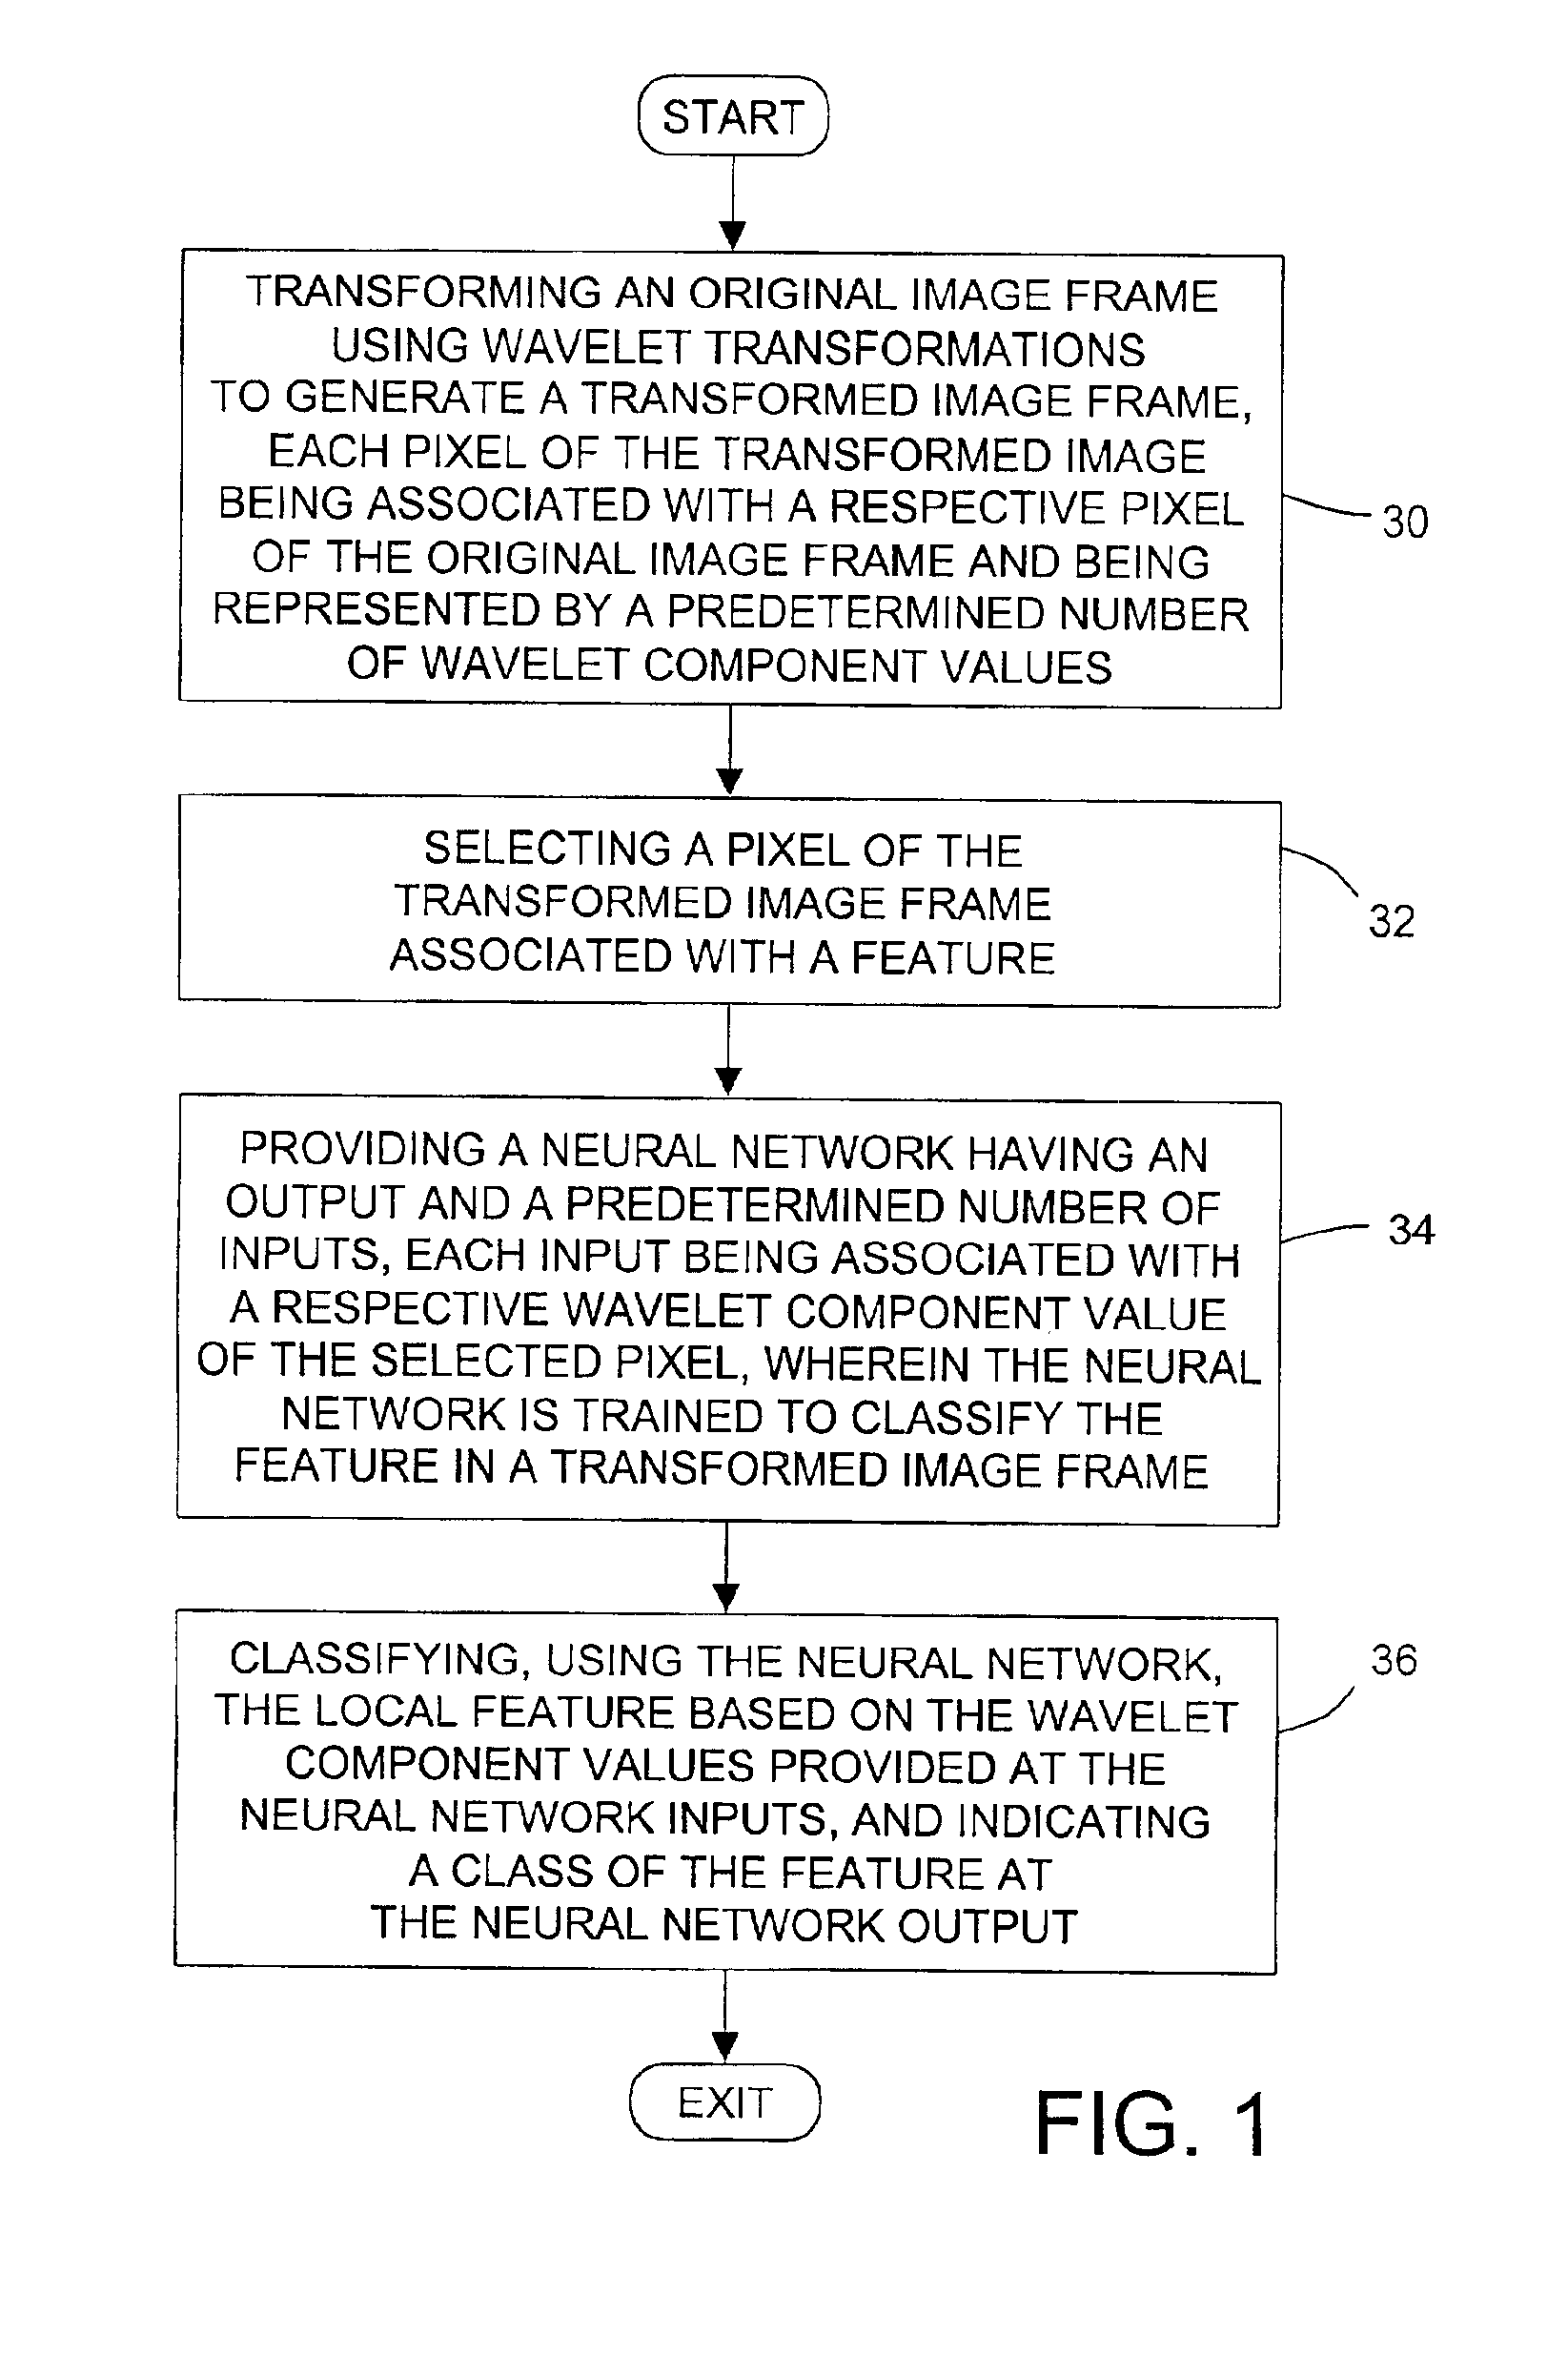 Method and apparatus for image analysis of a gabor-wavelet transformed image using a neural network